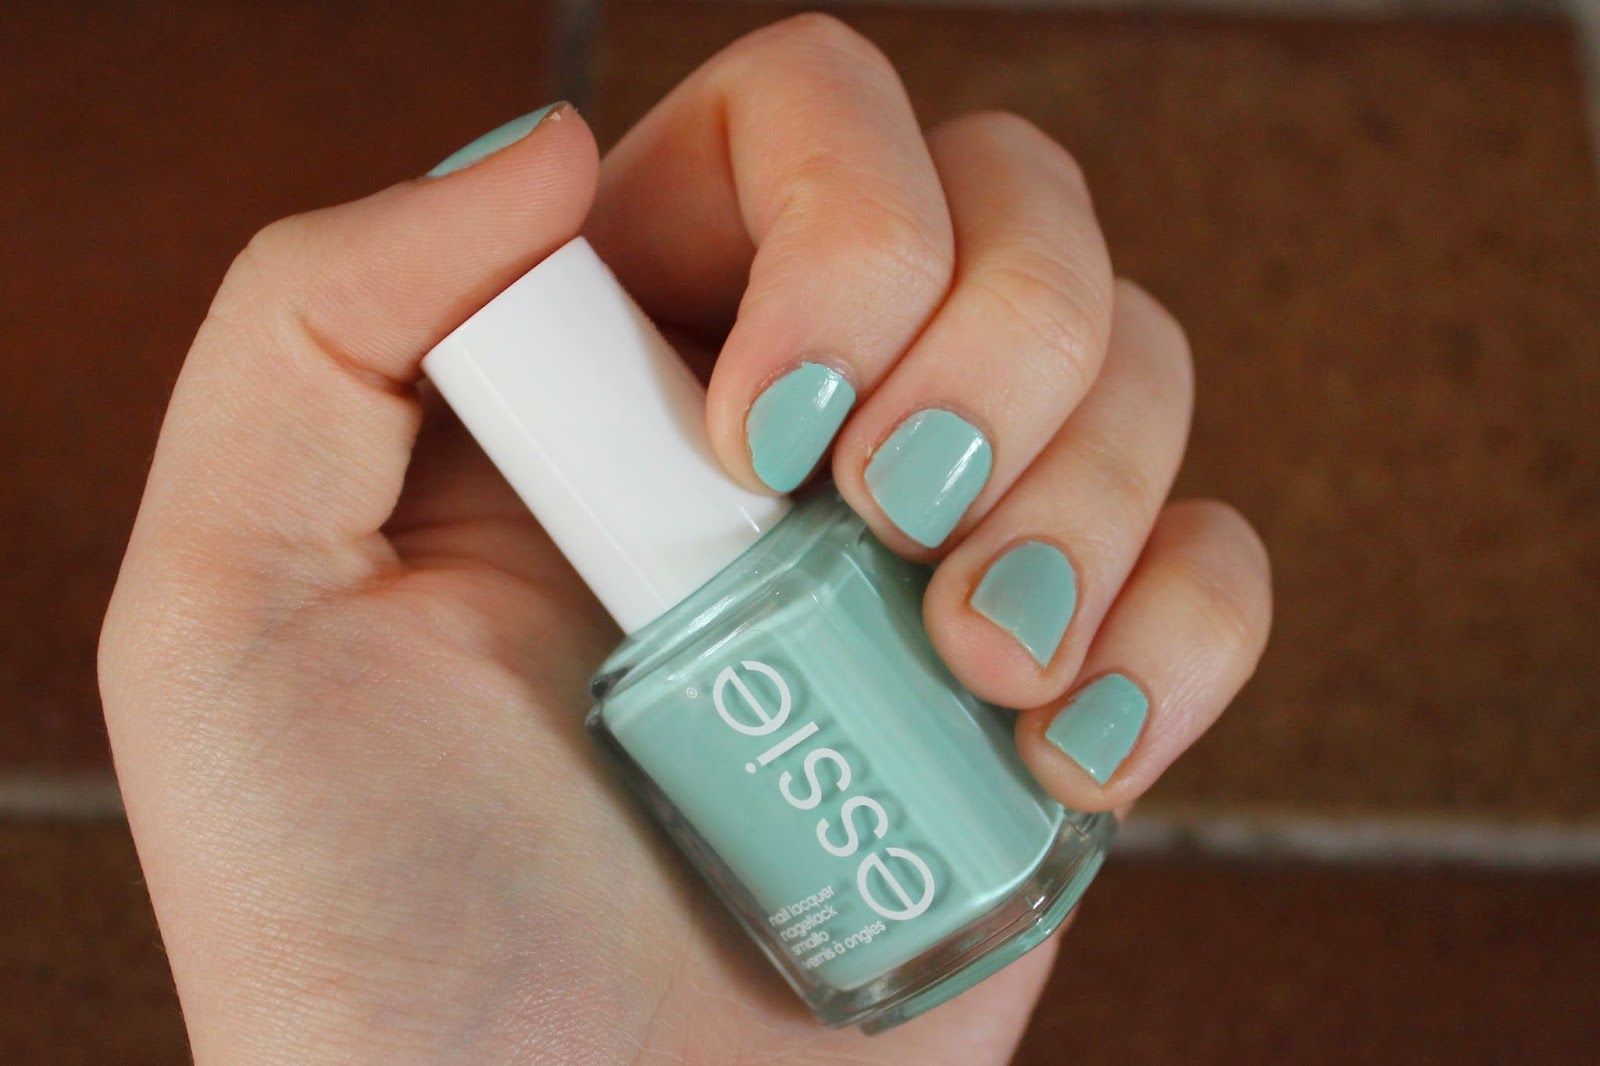 2. Essie Nail Polish in "Mint Candy Apple" - wide 9